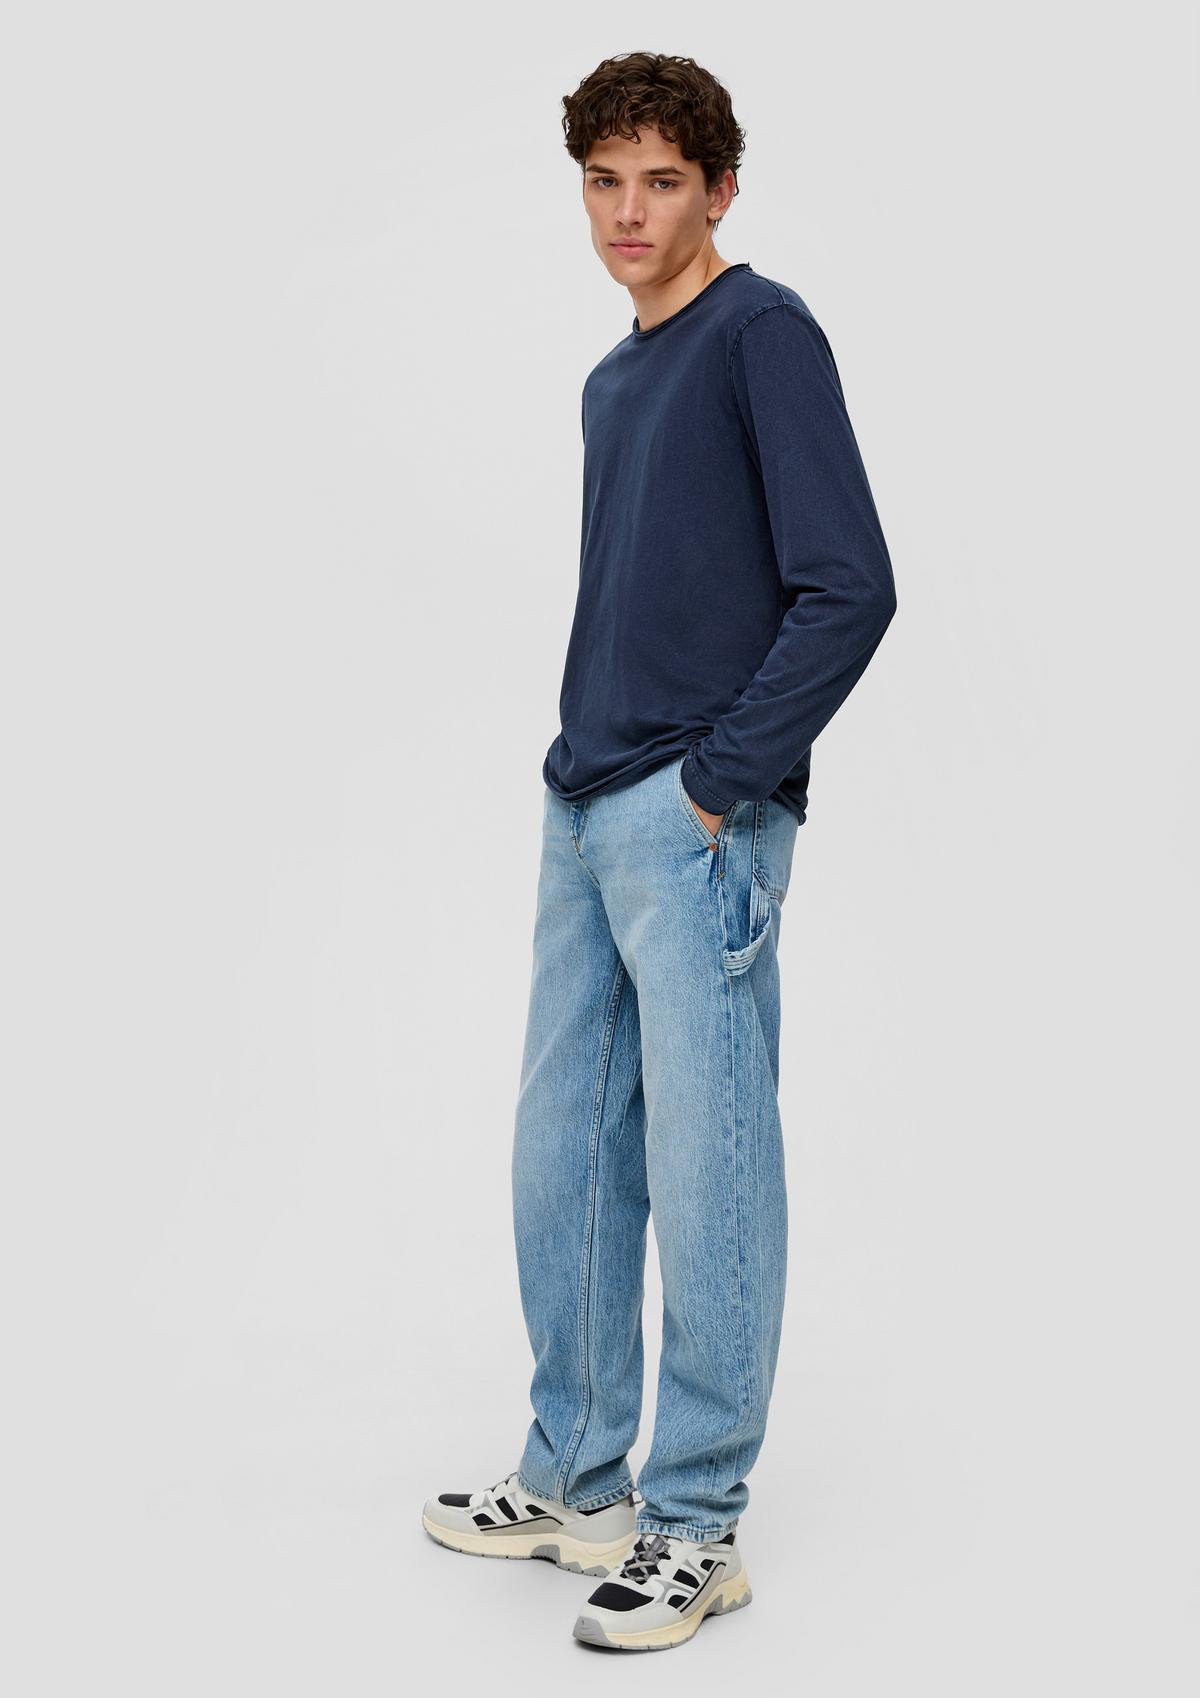 Jeans / Loose Fit / Mid Rise / Straight Leg